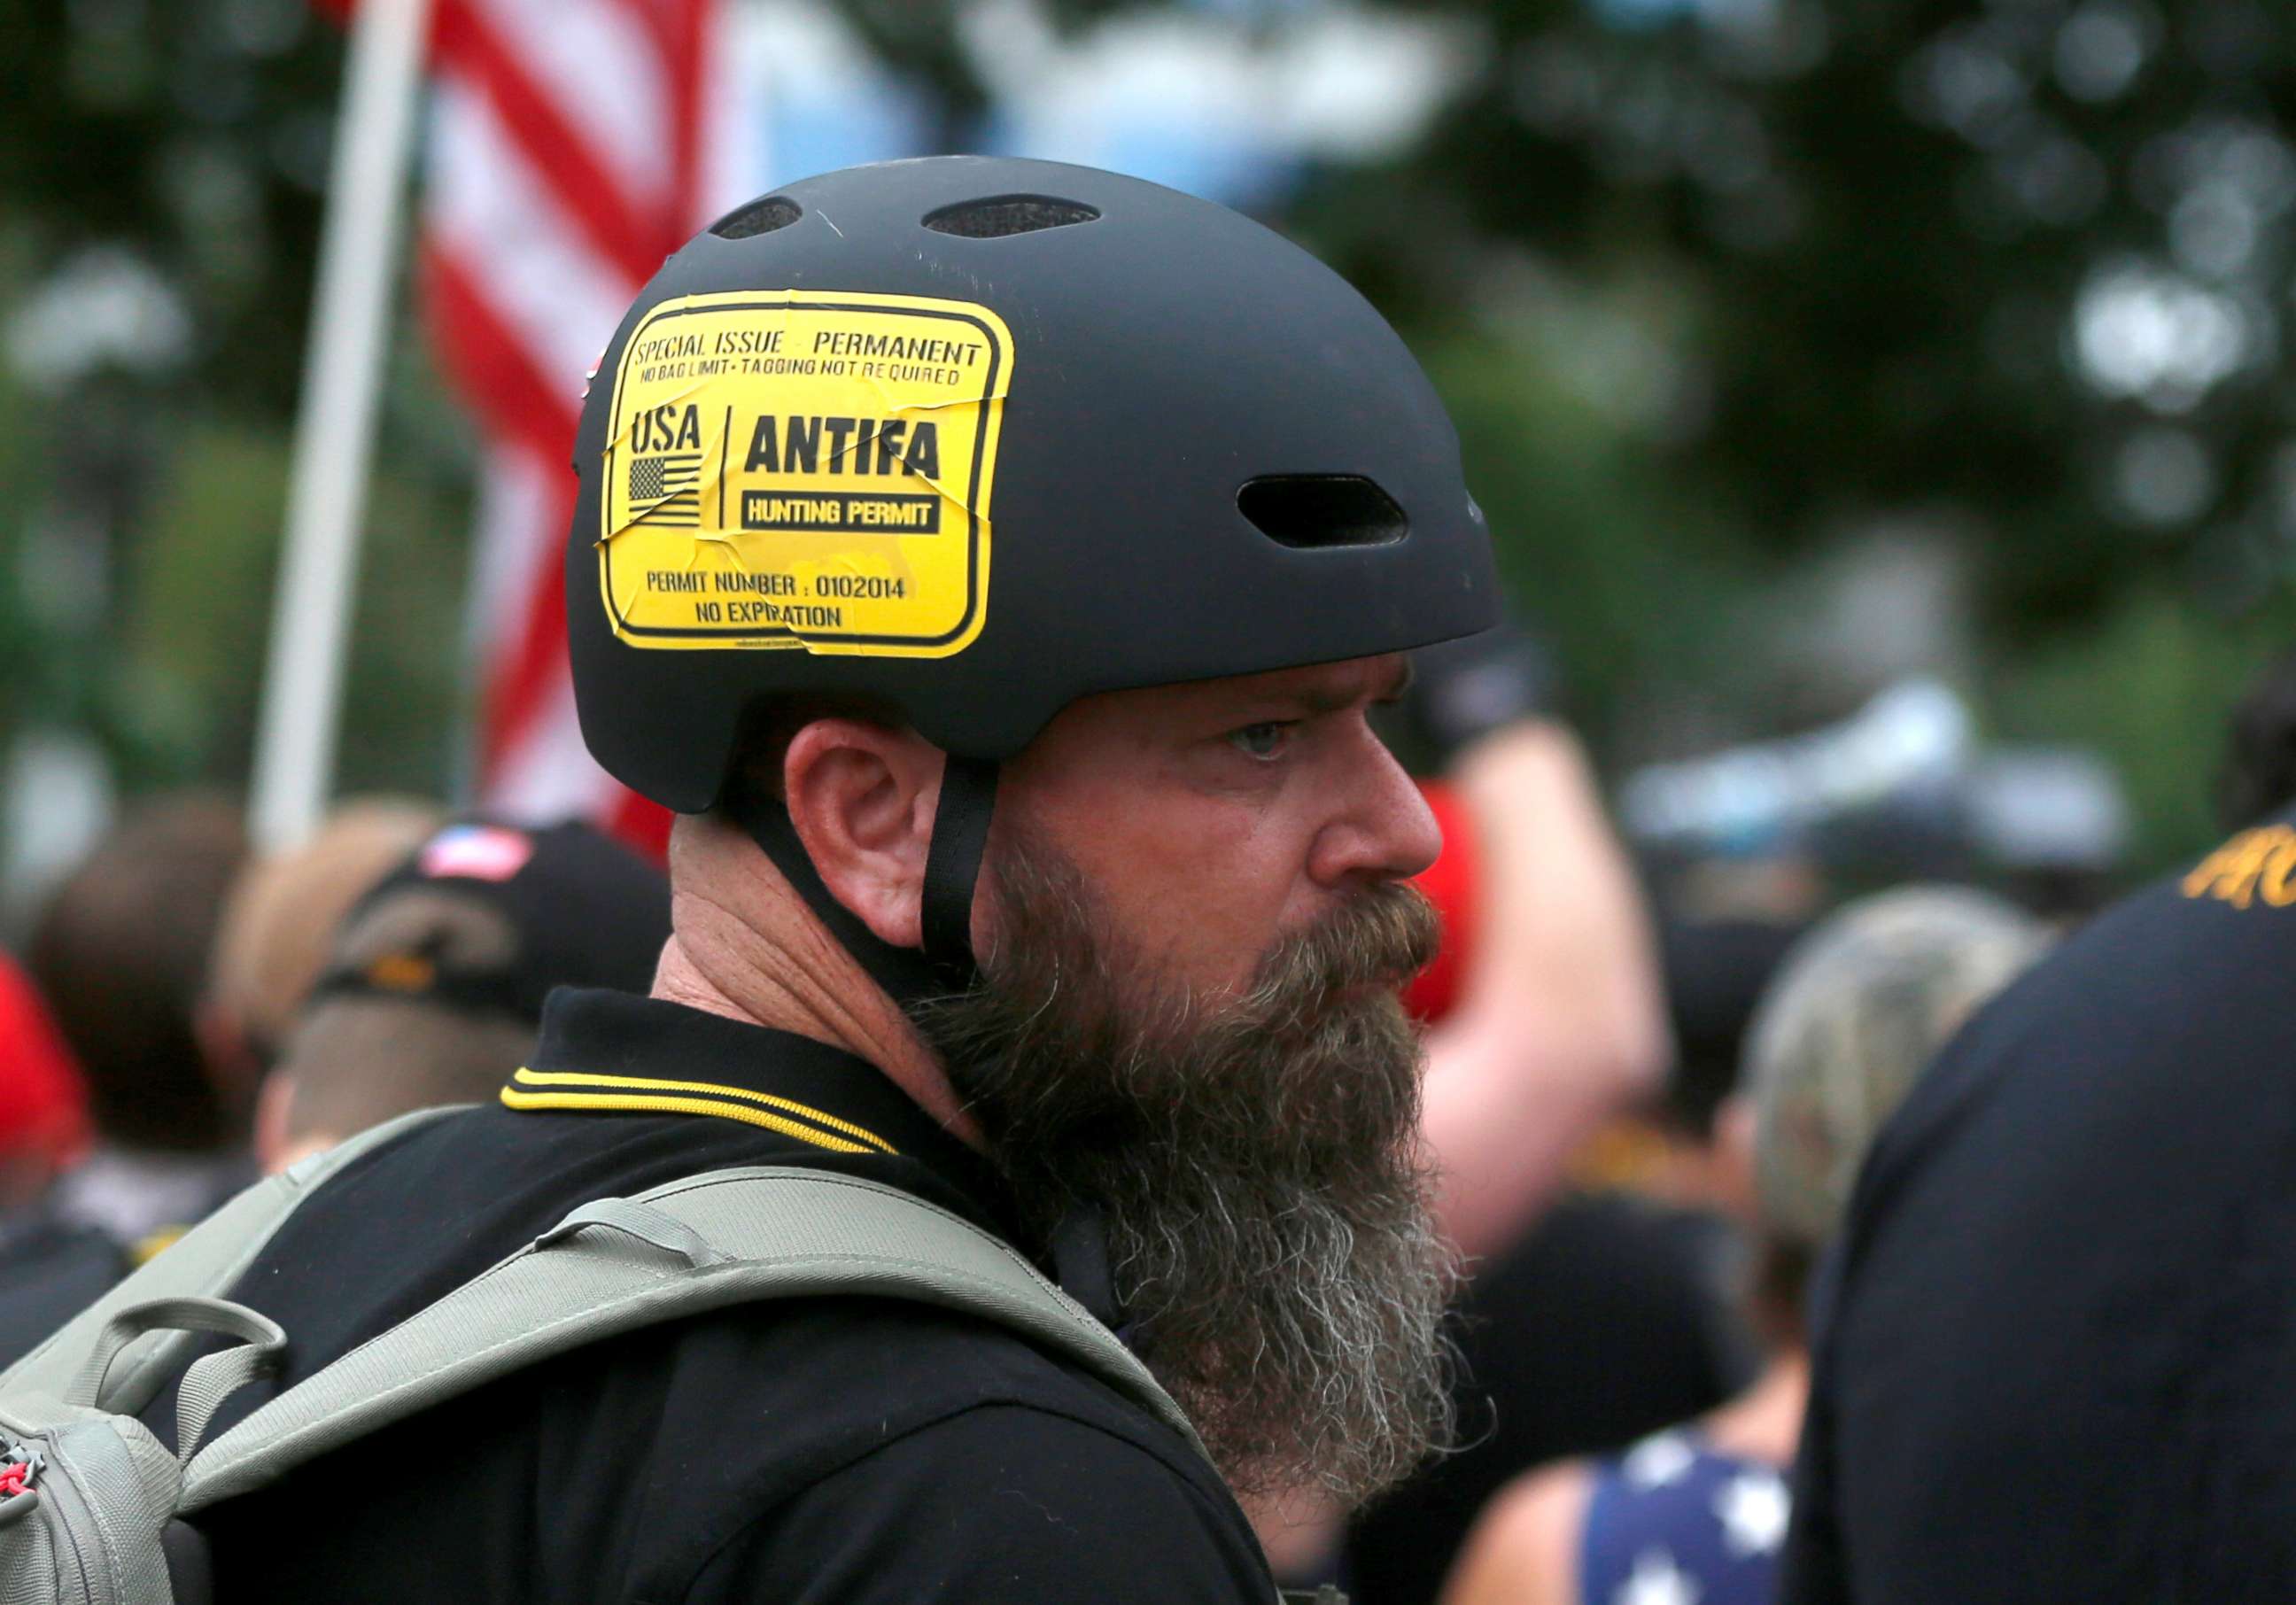 PHOTO: A man wears a sticker that says "Antifa Hunting Permit" at a Proud Boys rally in Portland, Ore., Aug. 17, 2019.